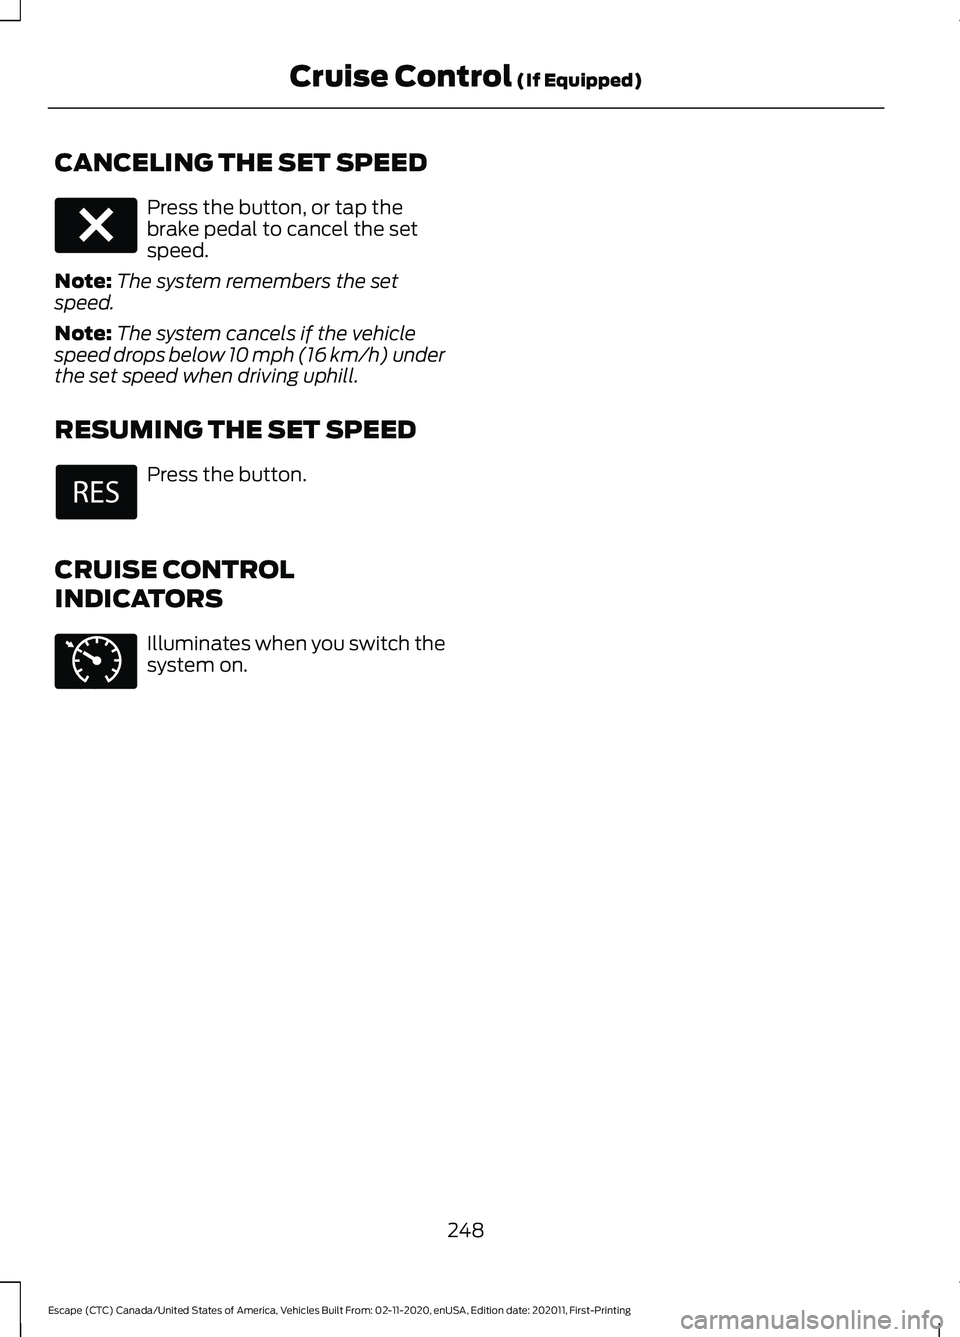 FORD ESCAPE 2021  Owners Manual CANCELING THE SET SPEED
Press the button, or tap the
brake pedal to cancel the set
speed.
Note: The system remembers the set
speed.
Note: The system cancels if the vehicle
speed drops below 10 mph (16